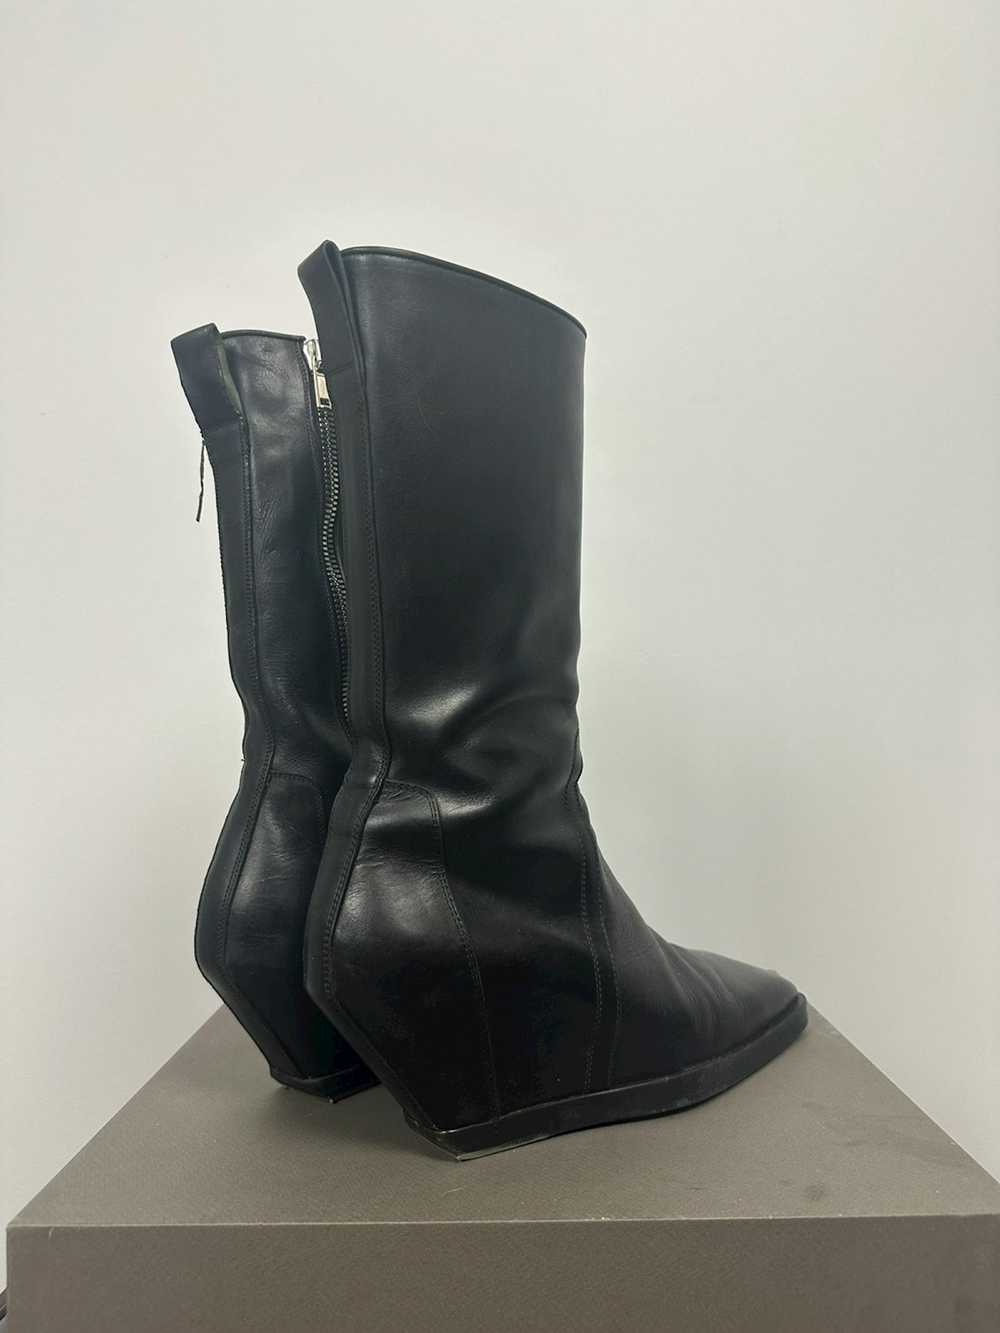 Rick Owens SS19 ‘BABEL’ Square Toe Wedge Boots - image 5